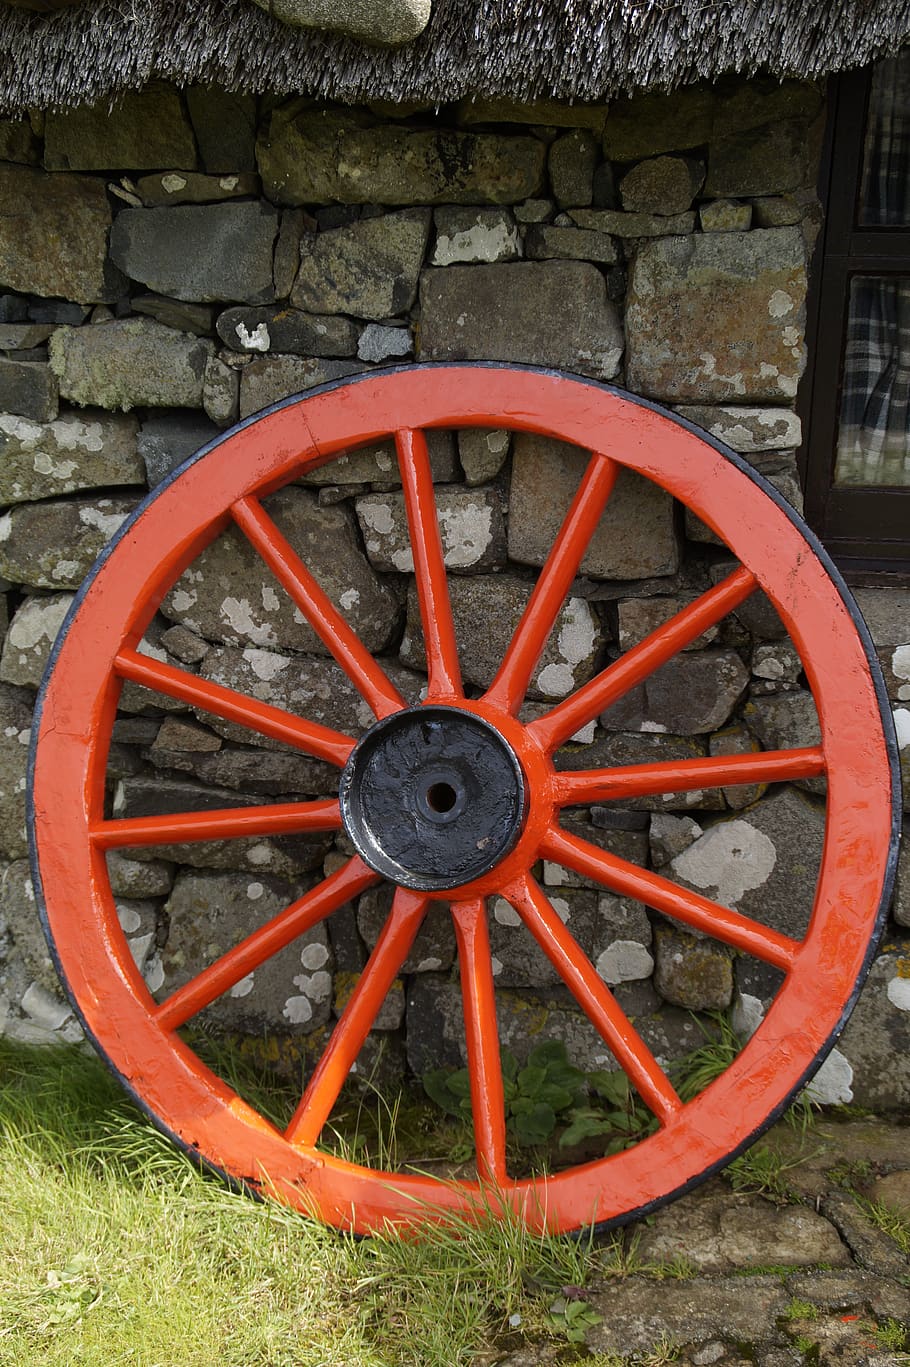 wagon wheel, carriage wheel, wheel, wooden wheel, old, spokes, wood, antique, agriculture, historically